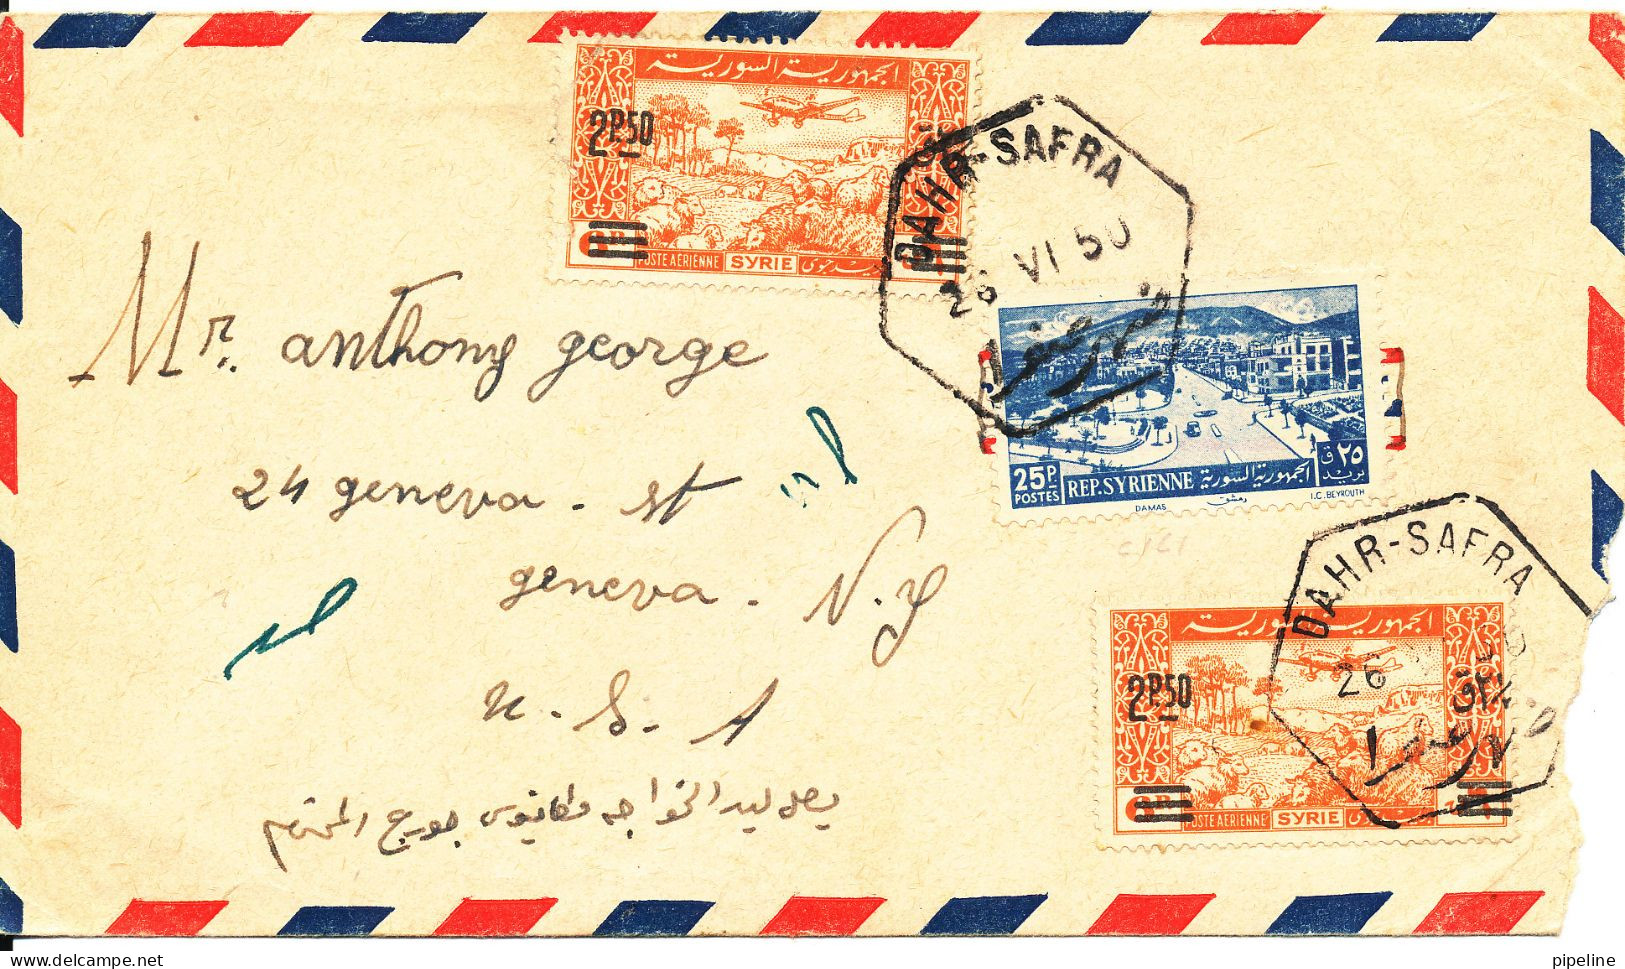 Syria Air Mail Cover Sent To USA Dahr Safra 26-6-1950 Overprinted Stamps The Cover Is Damaged In The Right Side - Syrie